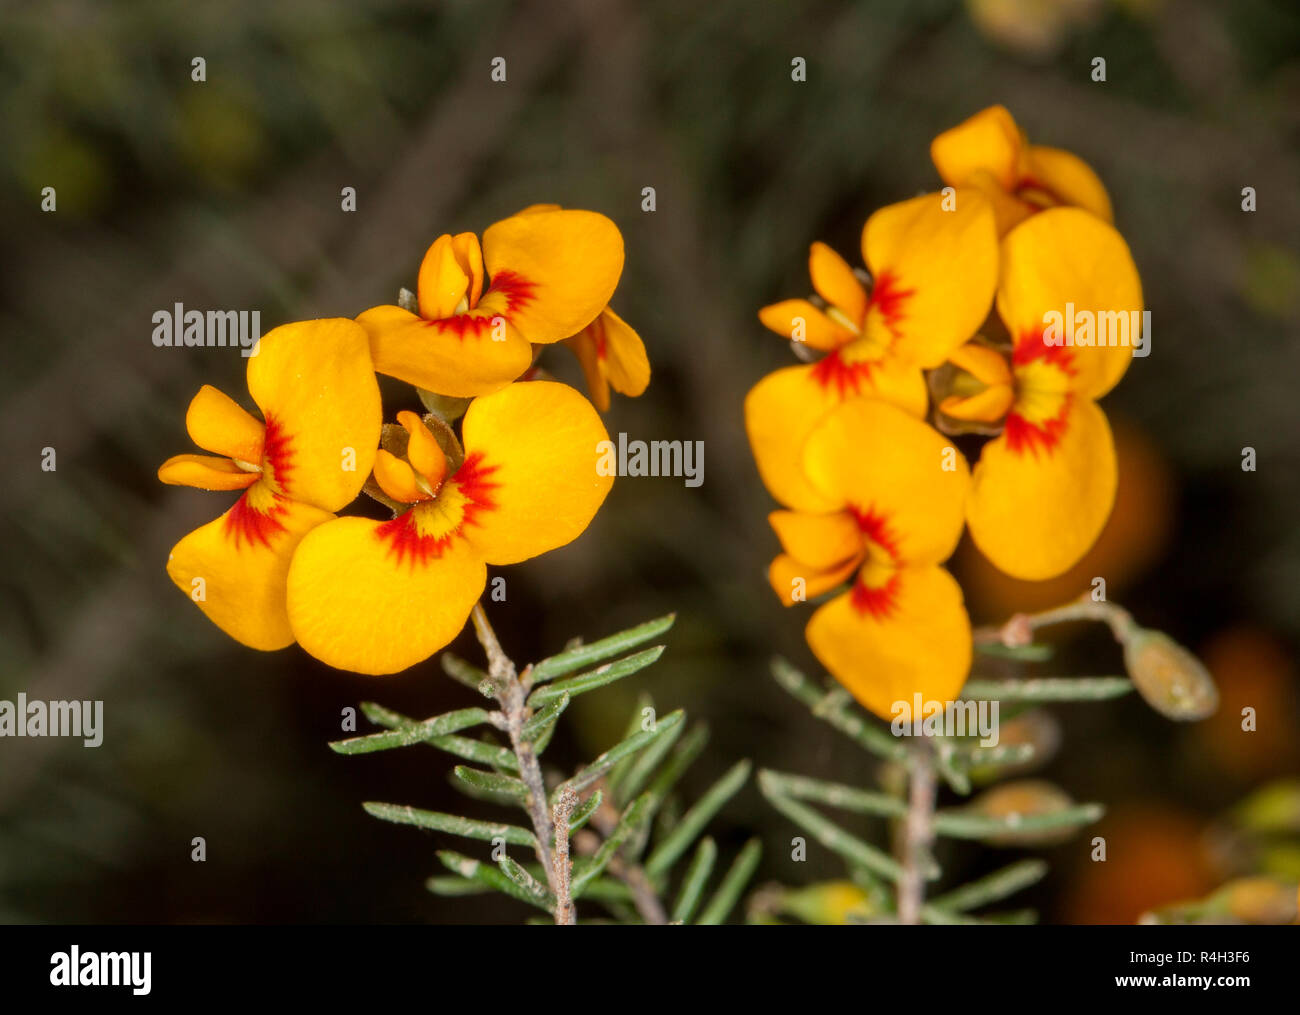 Australian wildflowers, vivid golden yellow flowers with red patches and tiny green leaves of shrub Dillwynia floribunda against dark green background Stock Photo